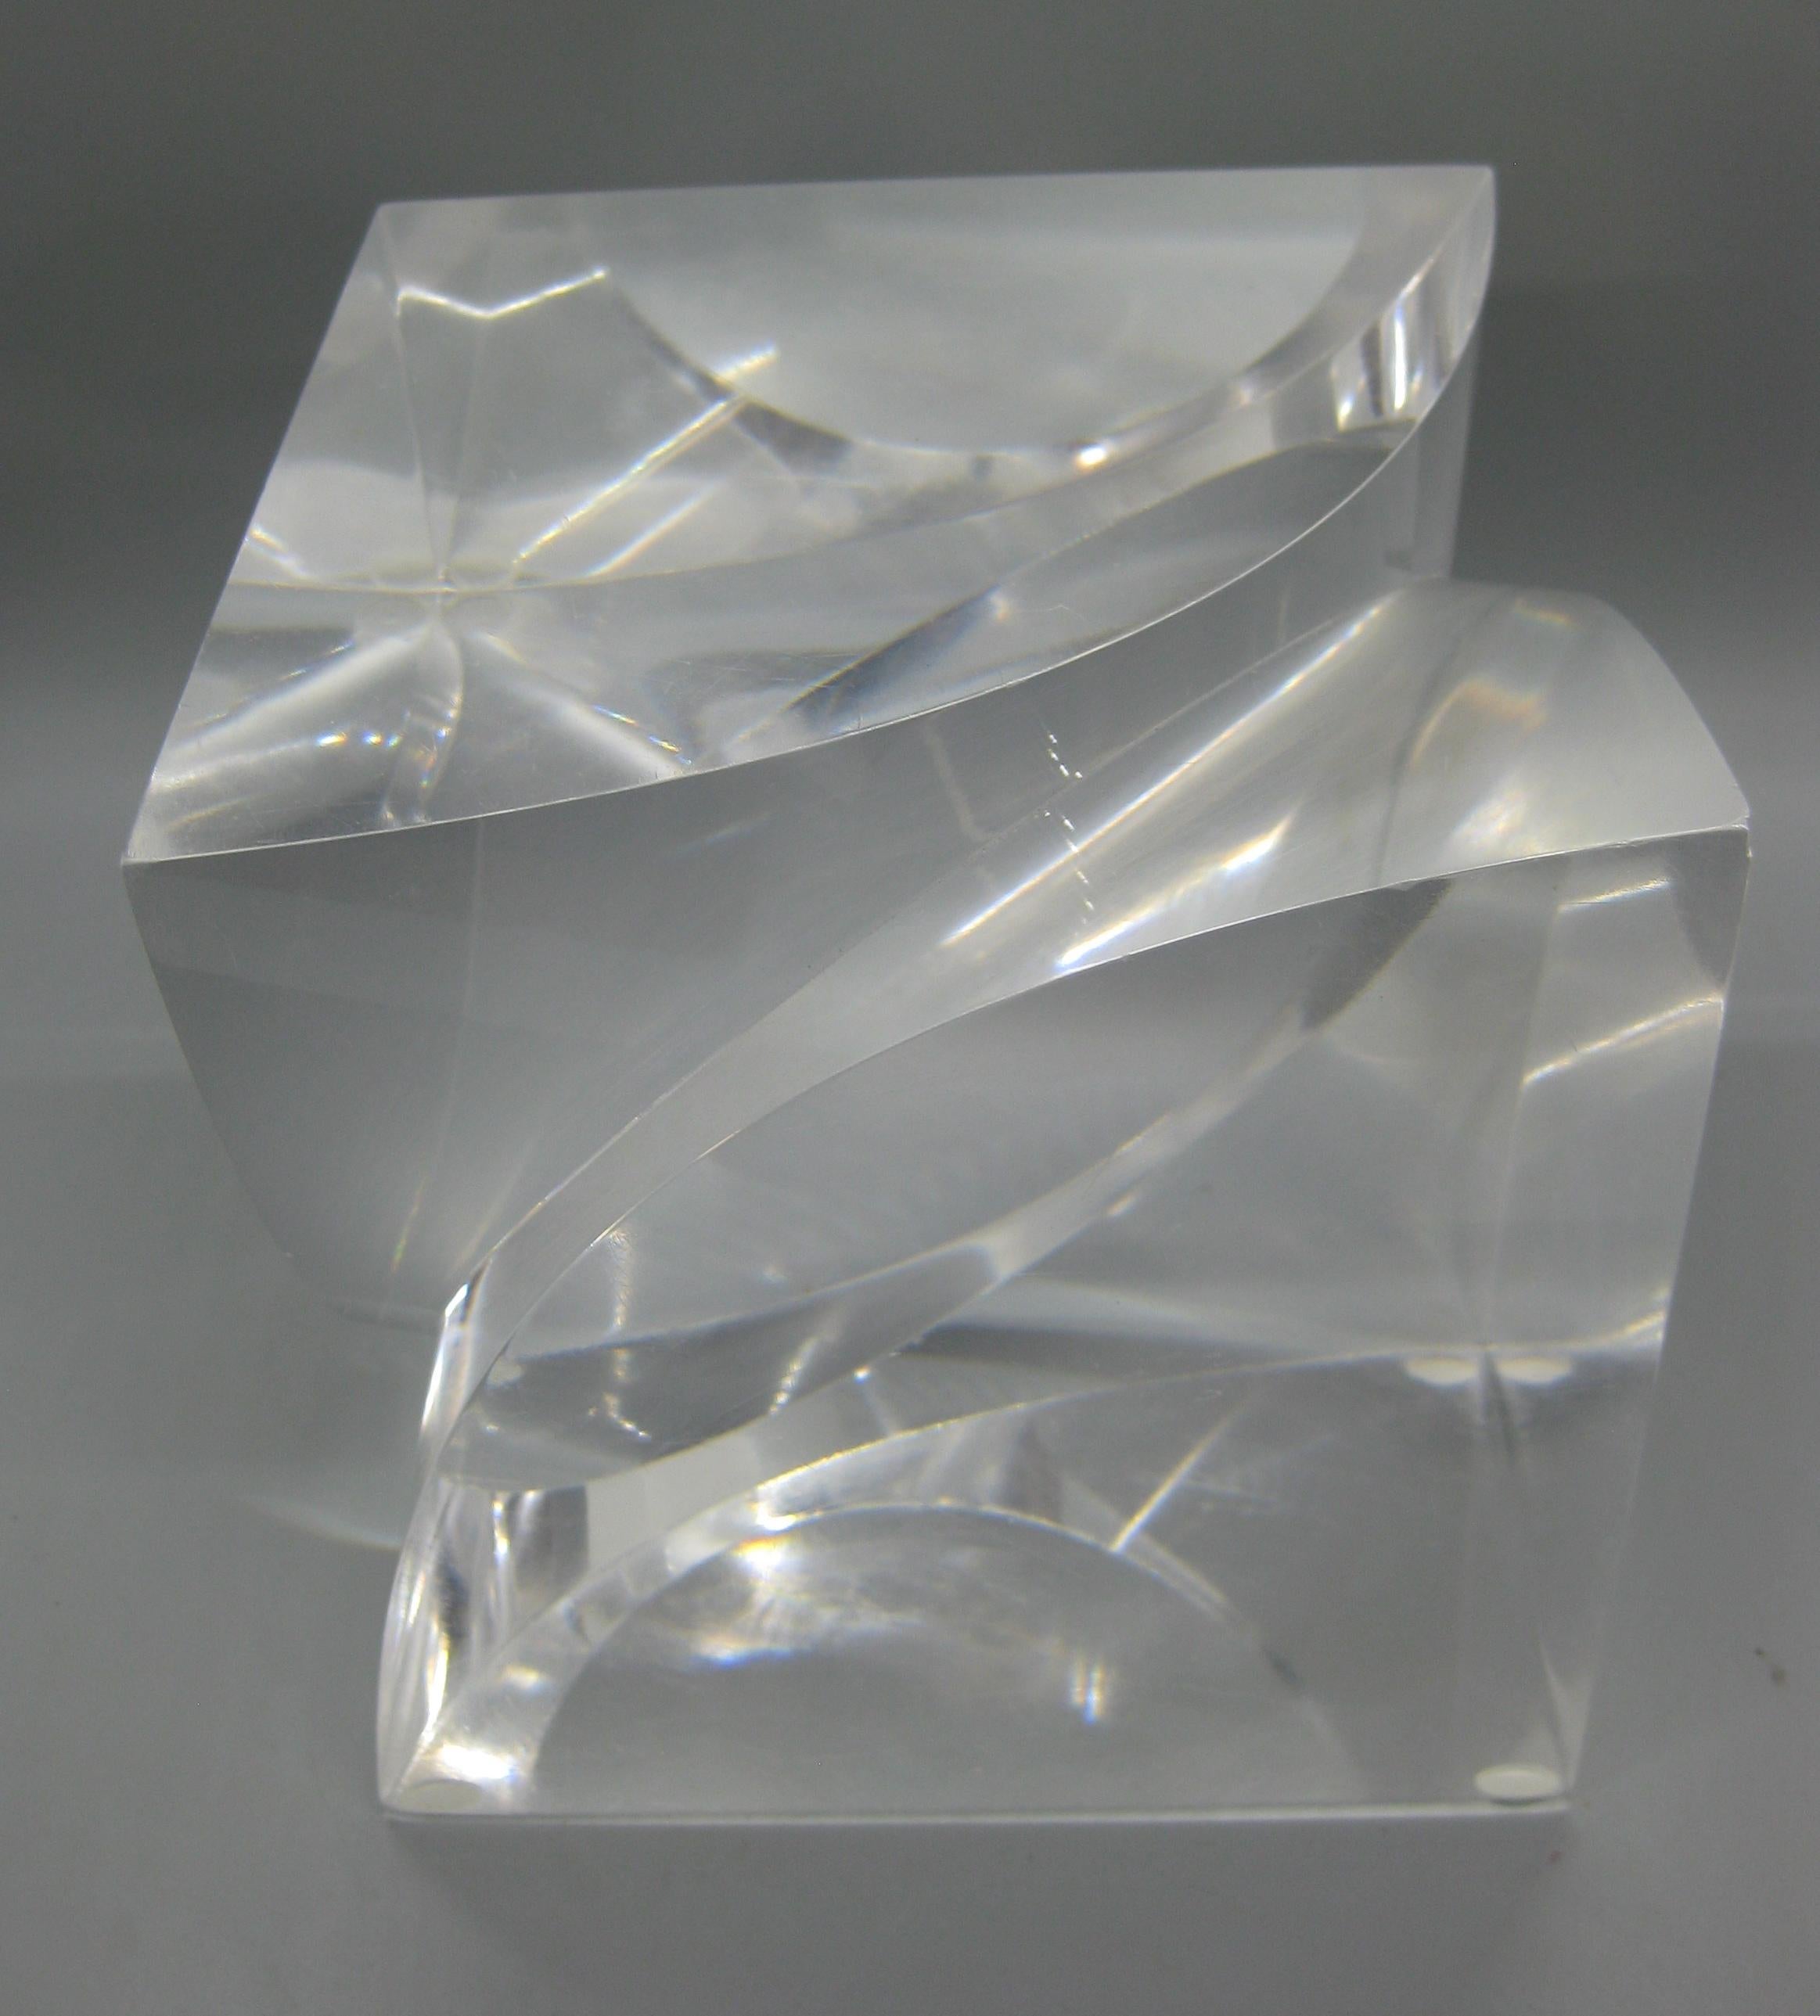 1960's-1970's Lucite Acrylic Optical Op-Art Large Cube Abstract Sculpture For Sale 2